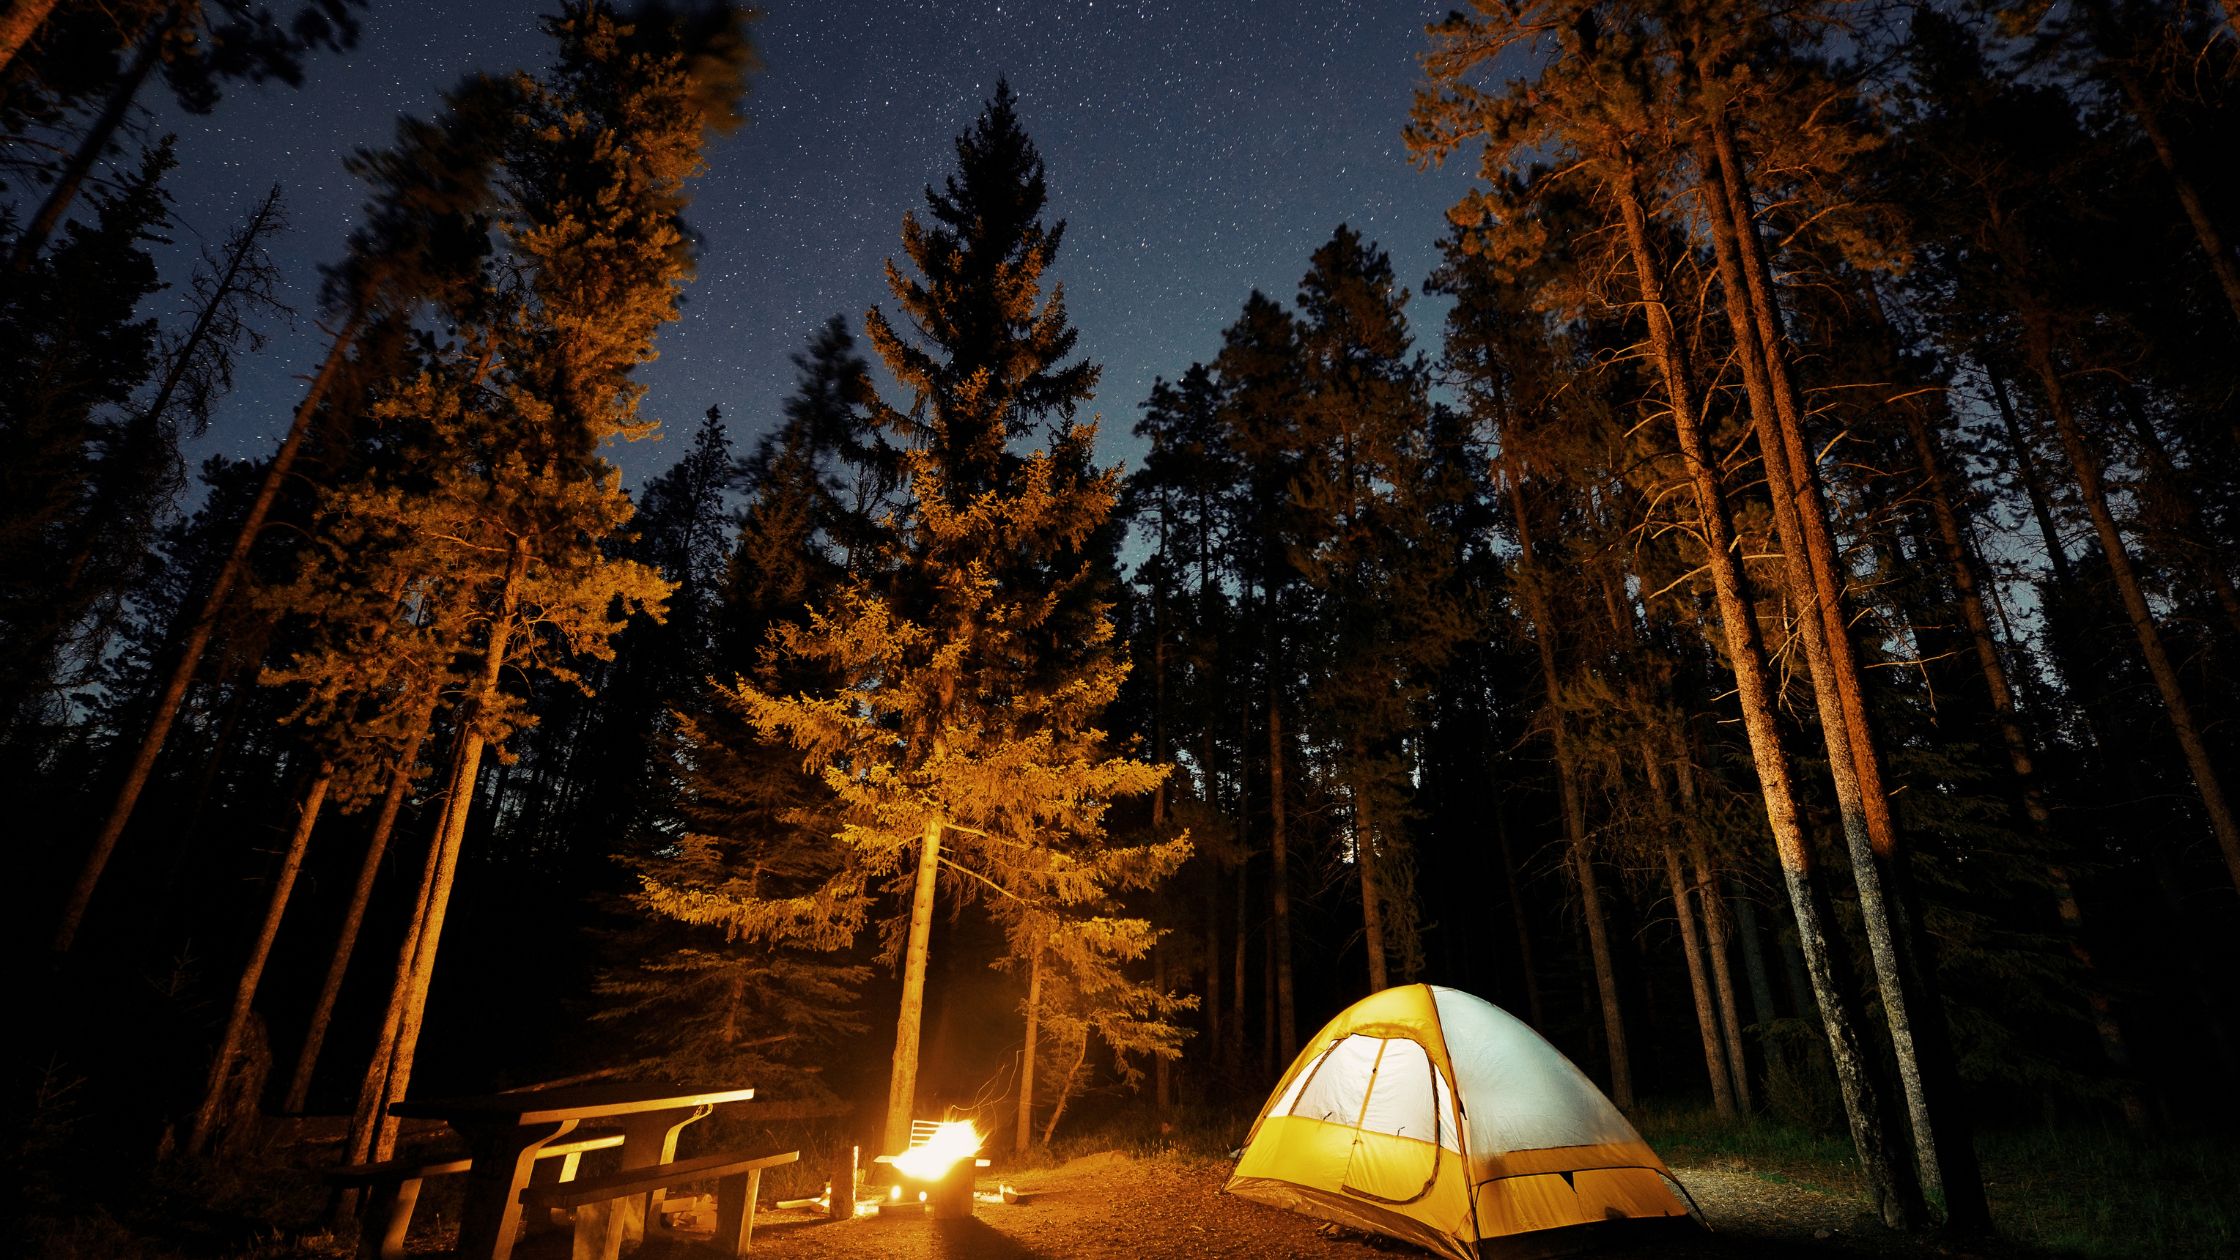 camp site under the stars